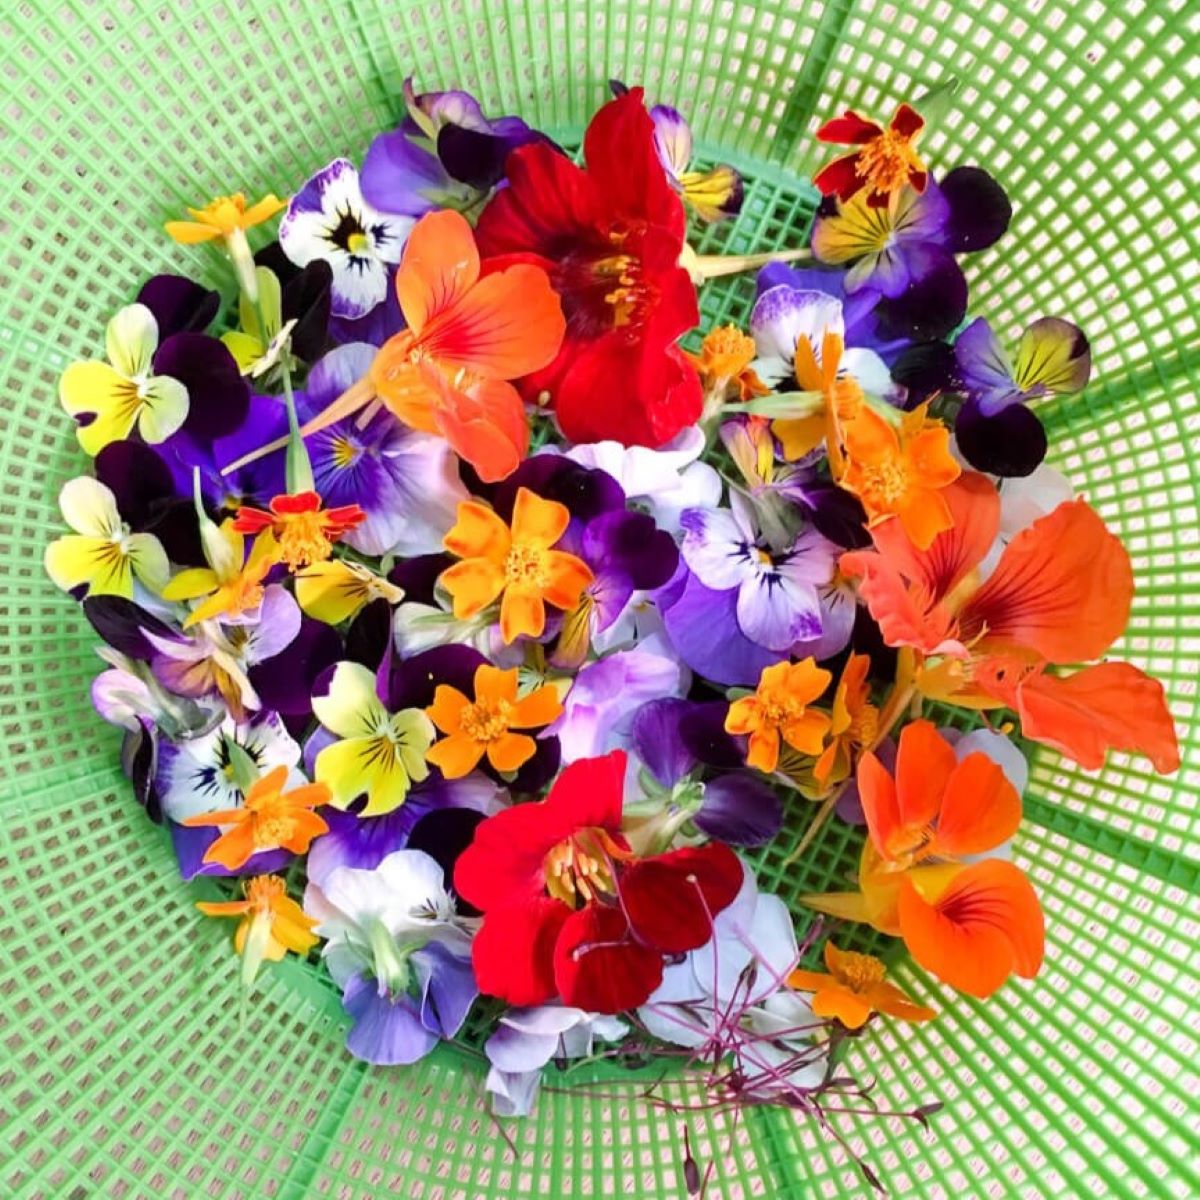 How To Store Edible Flowers